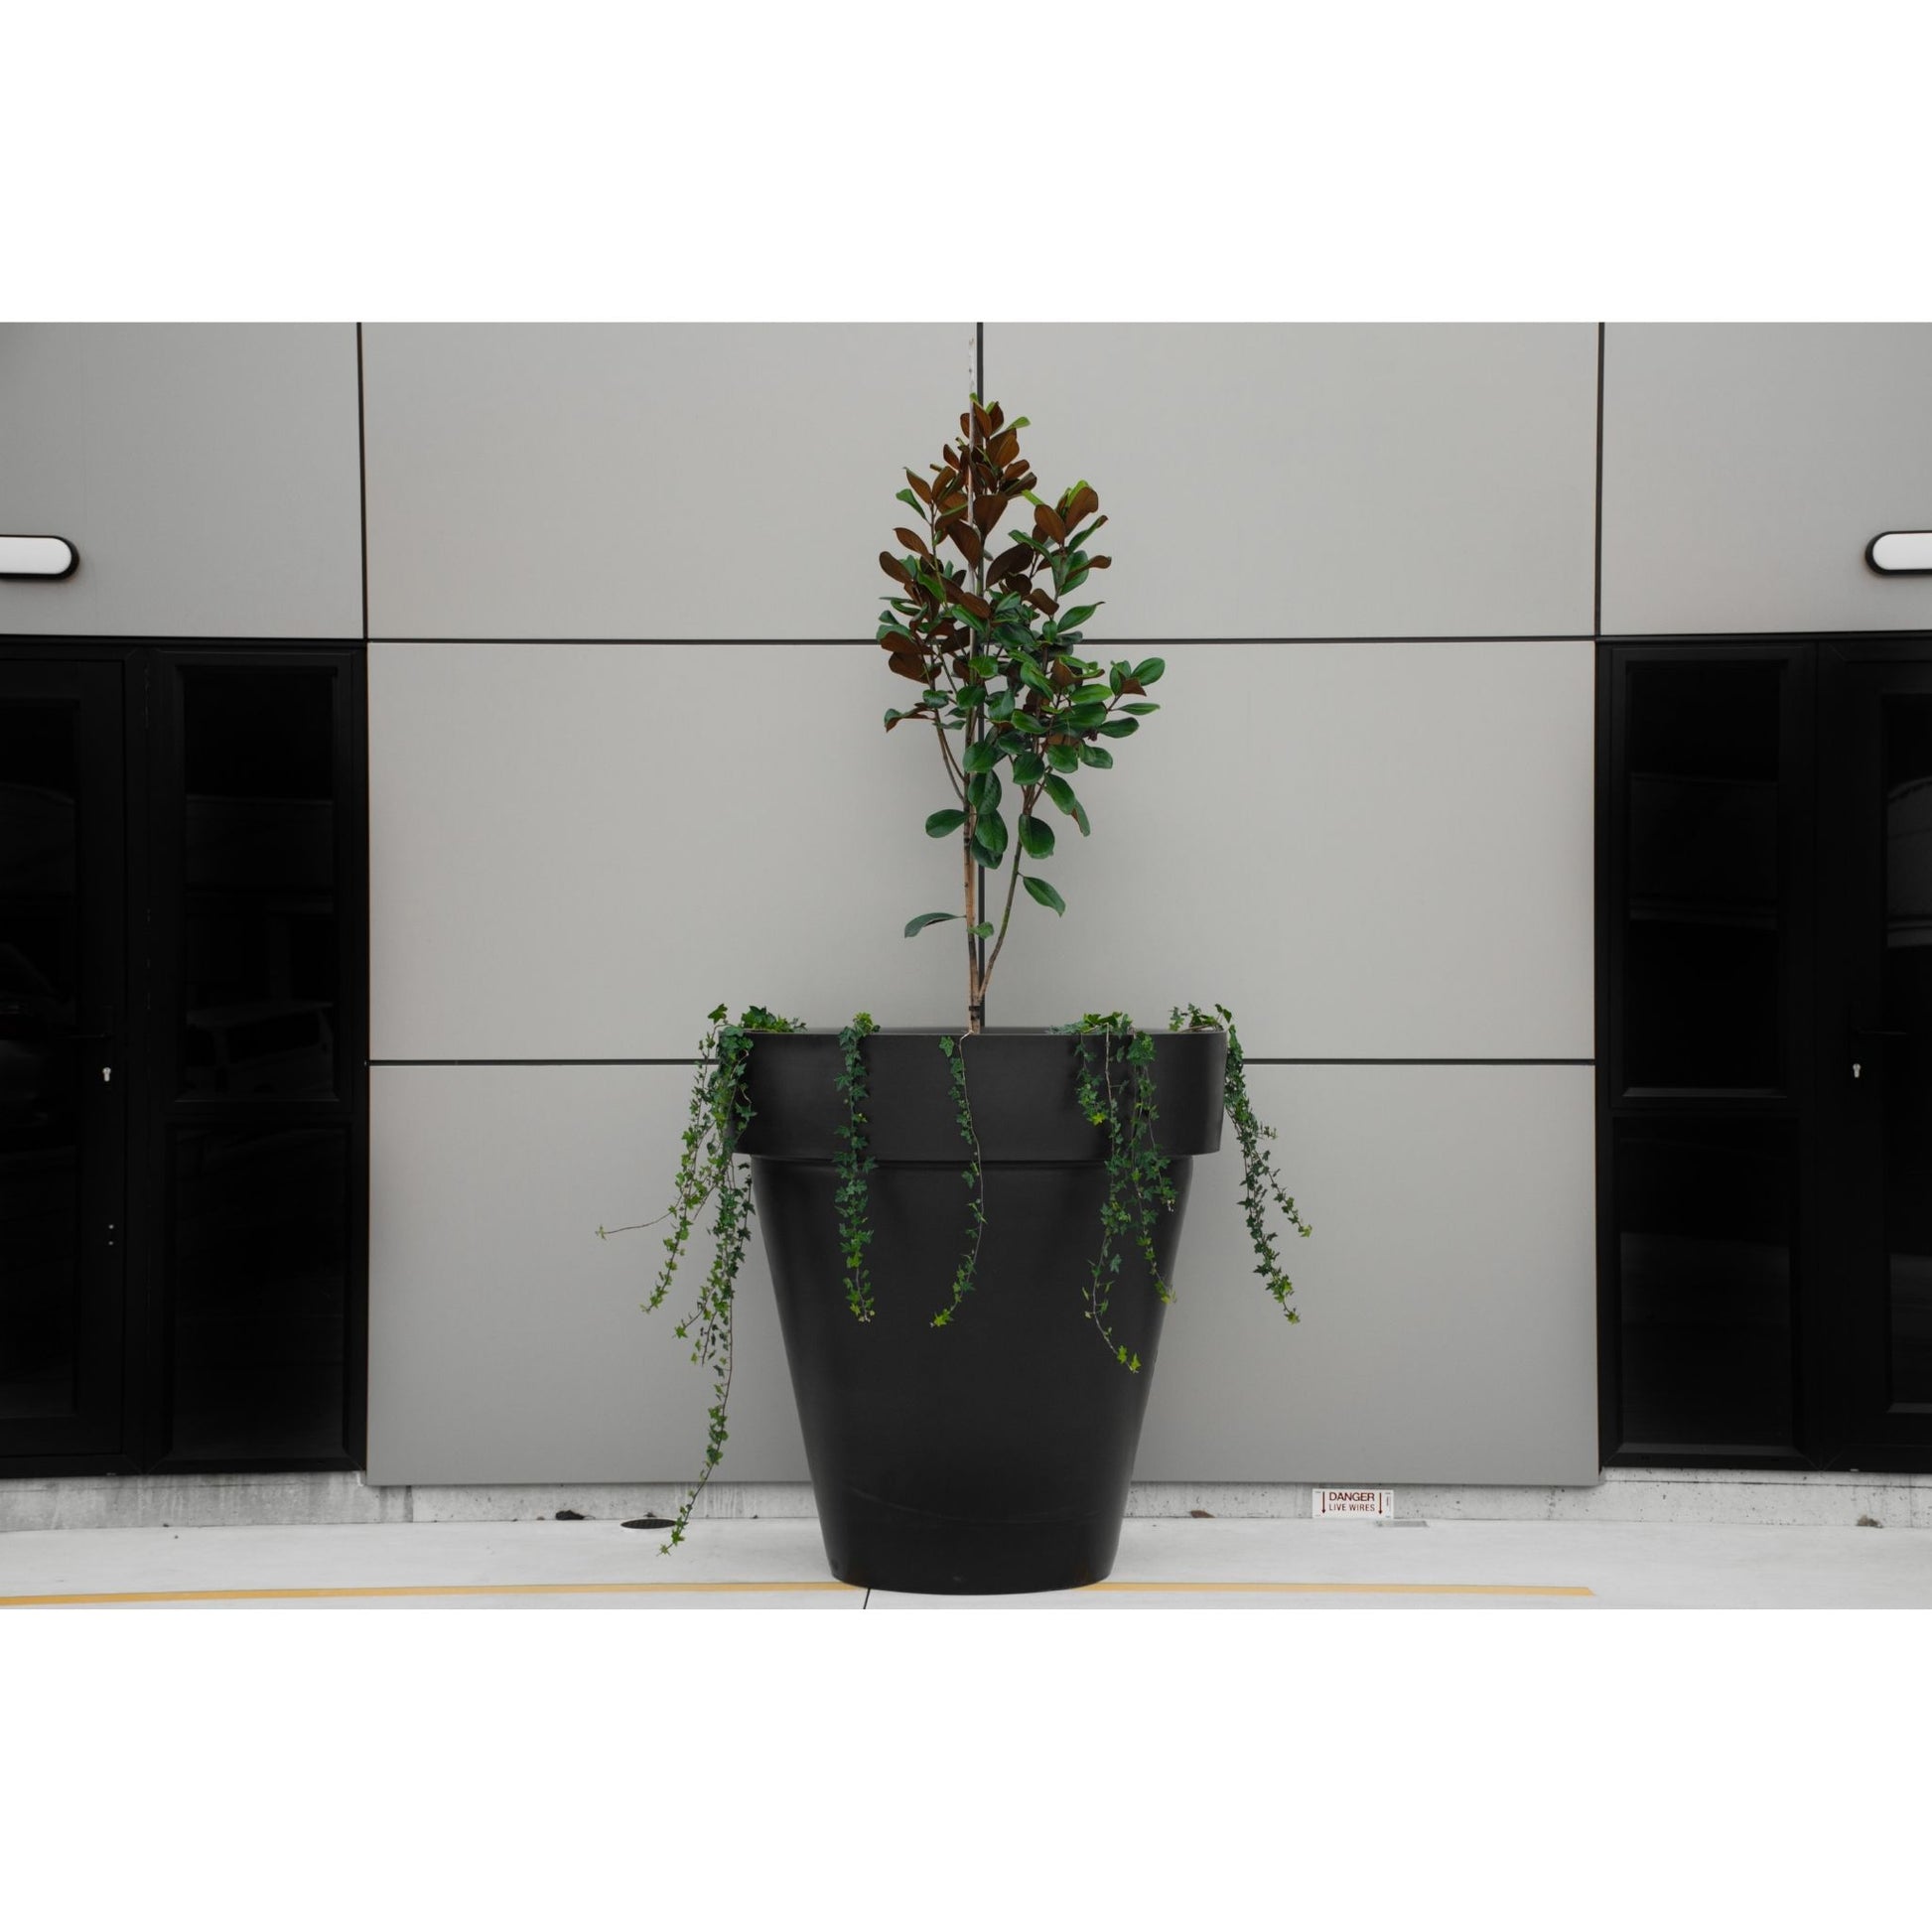 Large black planter pot with a magnolia tree planted in it.